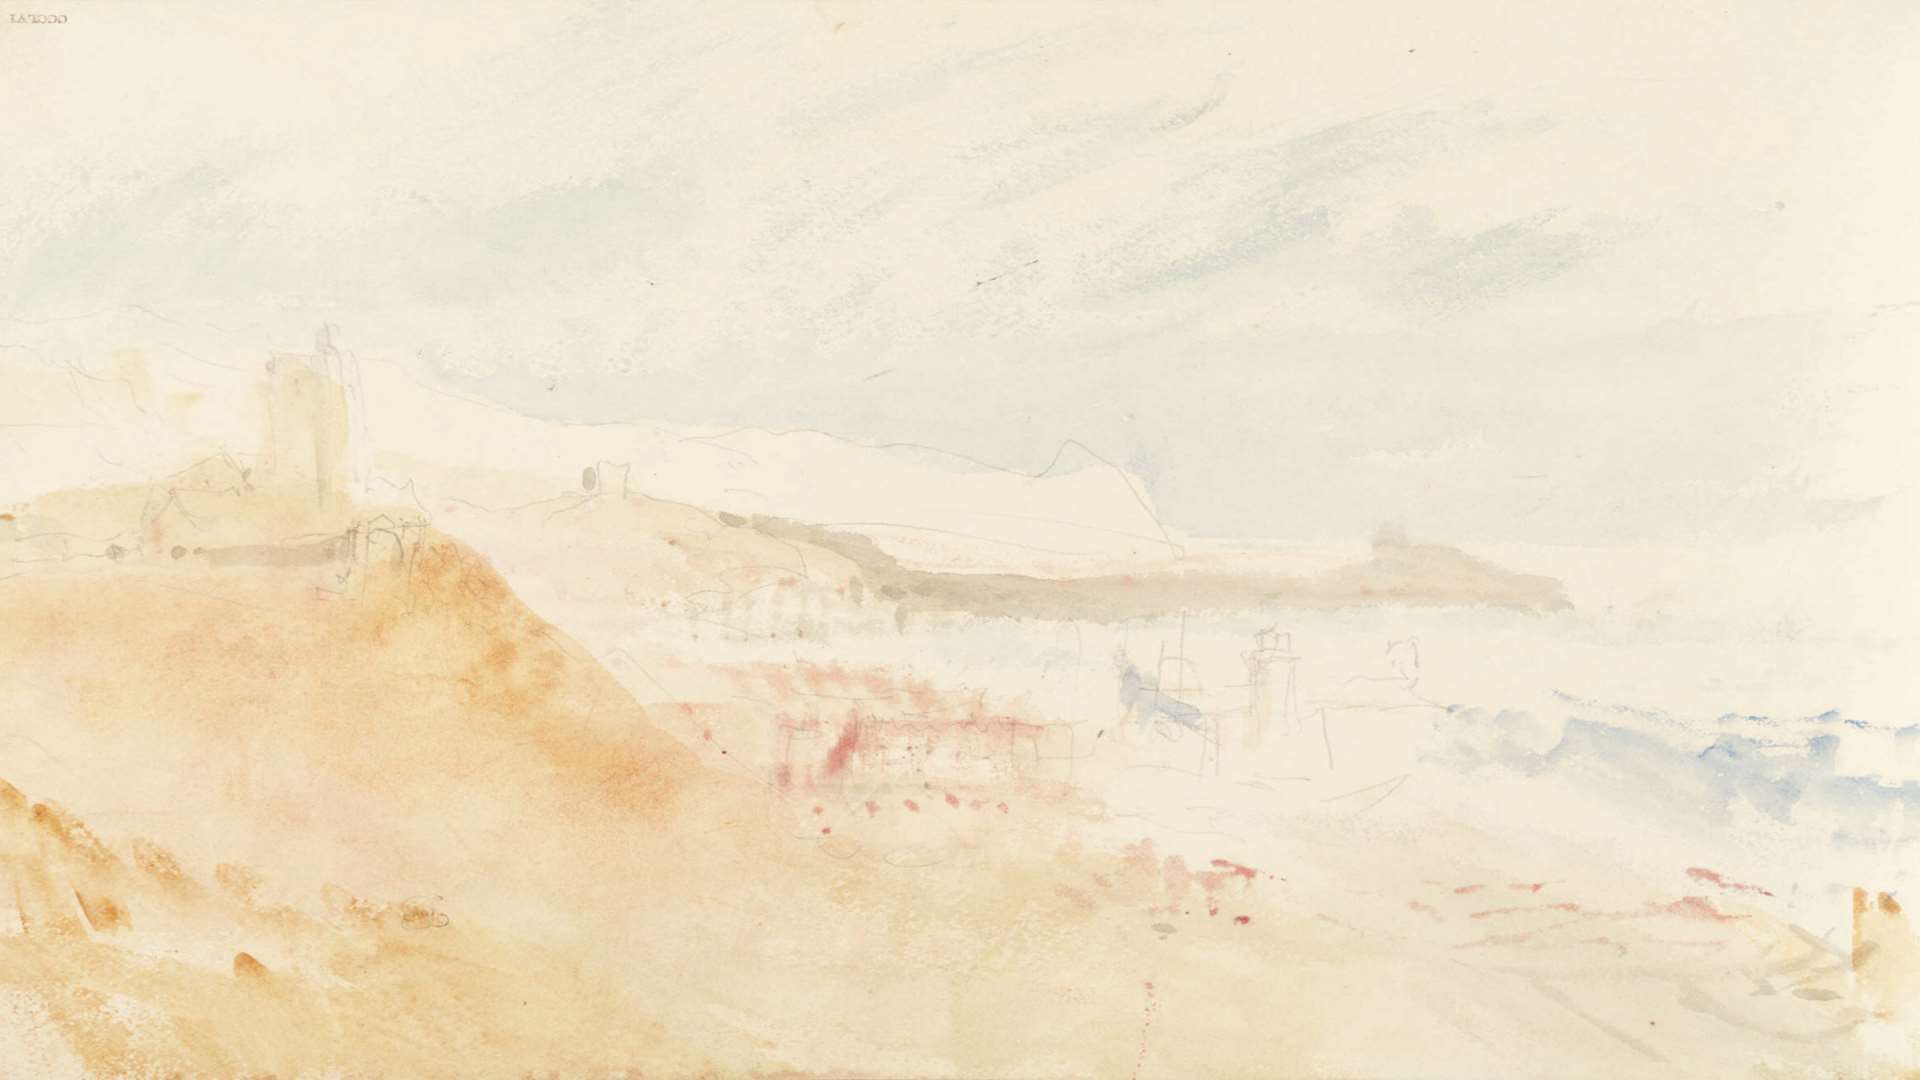 'Folkestone, with the Church of St Mary and St Eanswythe and a Martello Tower in the Distance 1845' by Turner. Picture: Tate collection